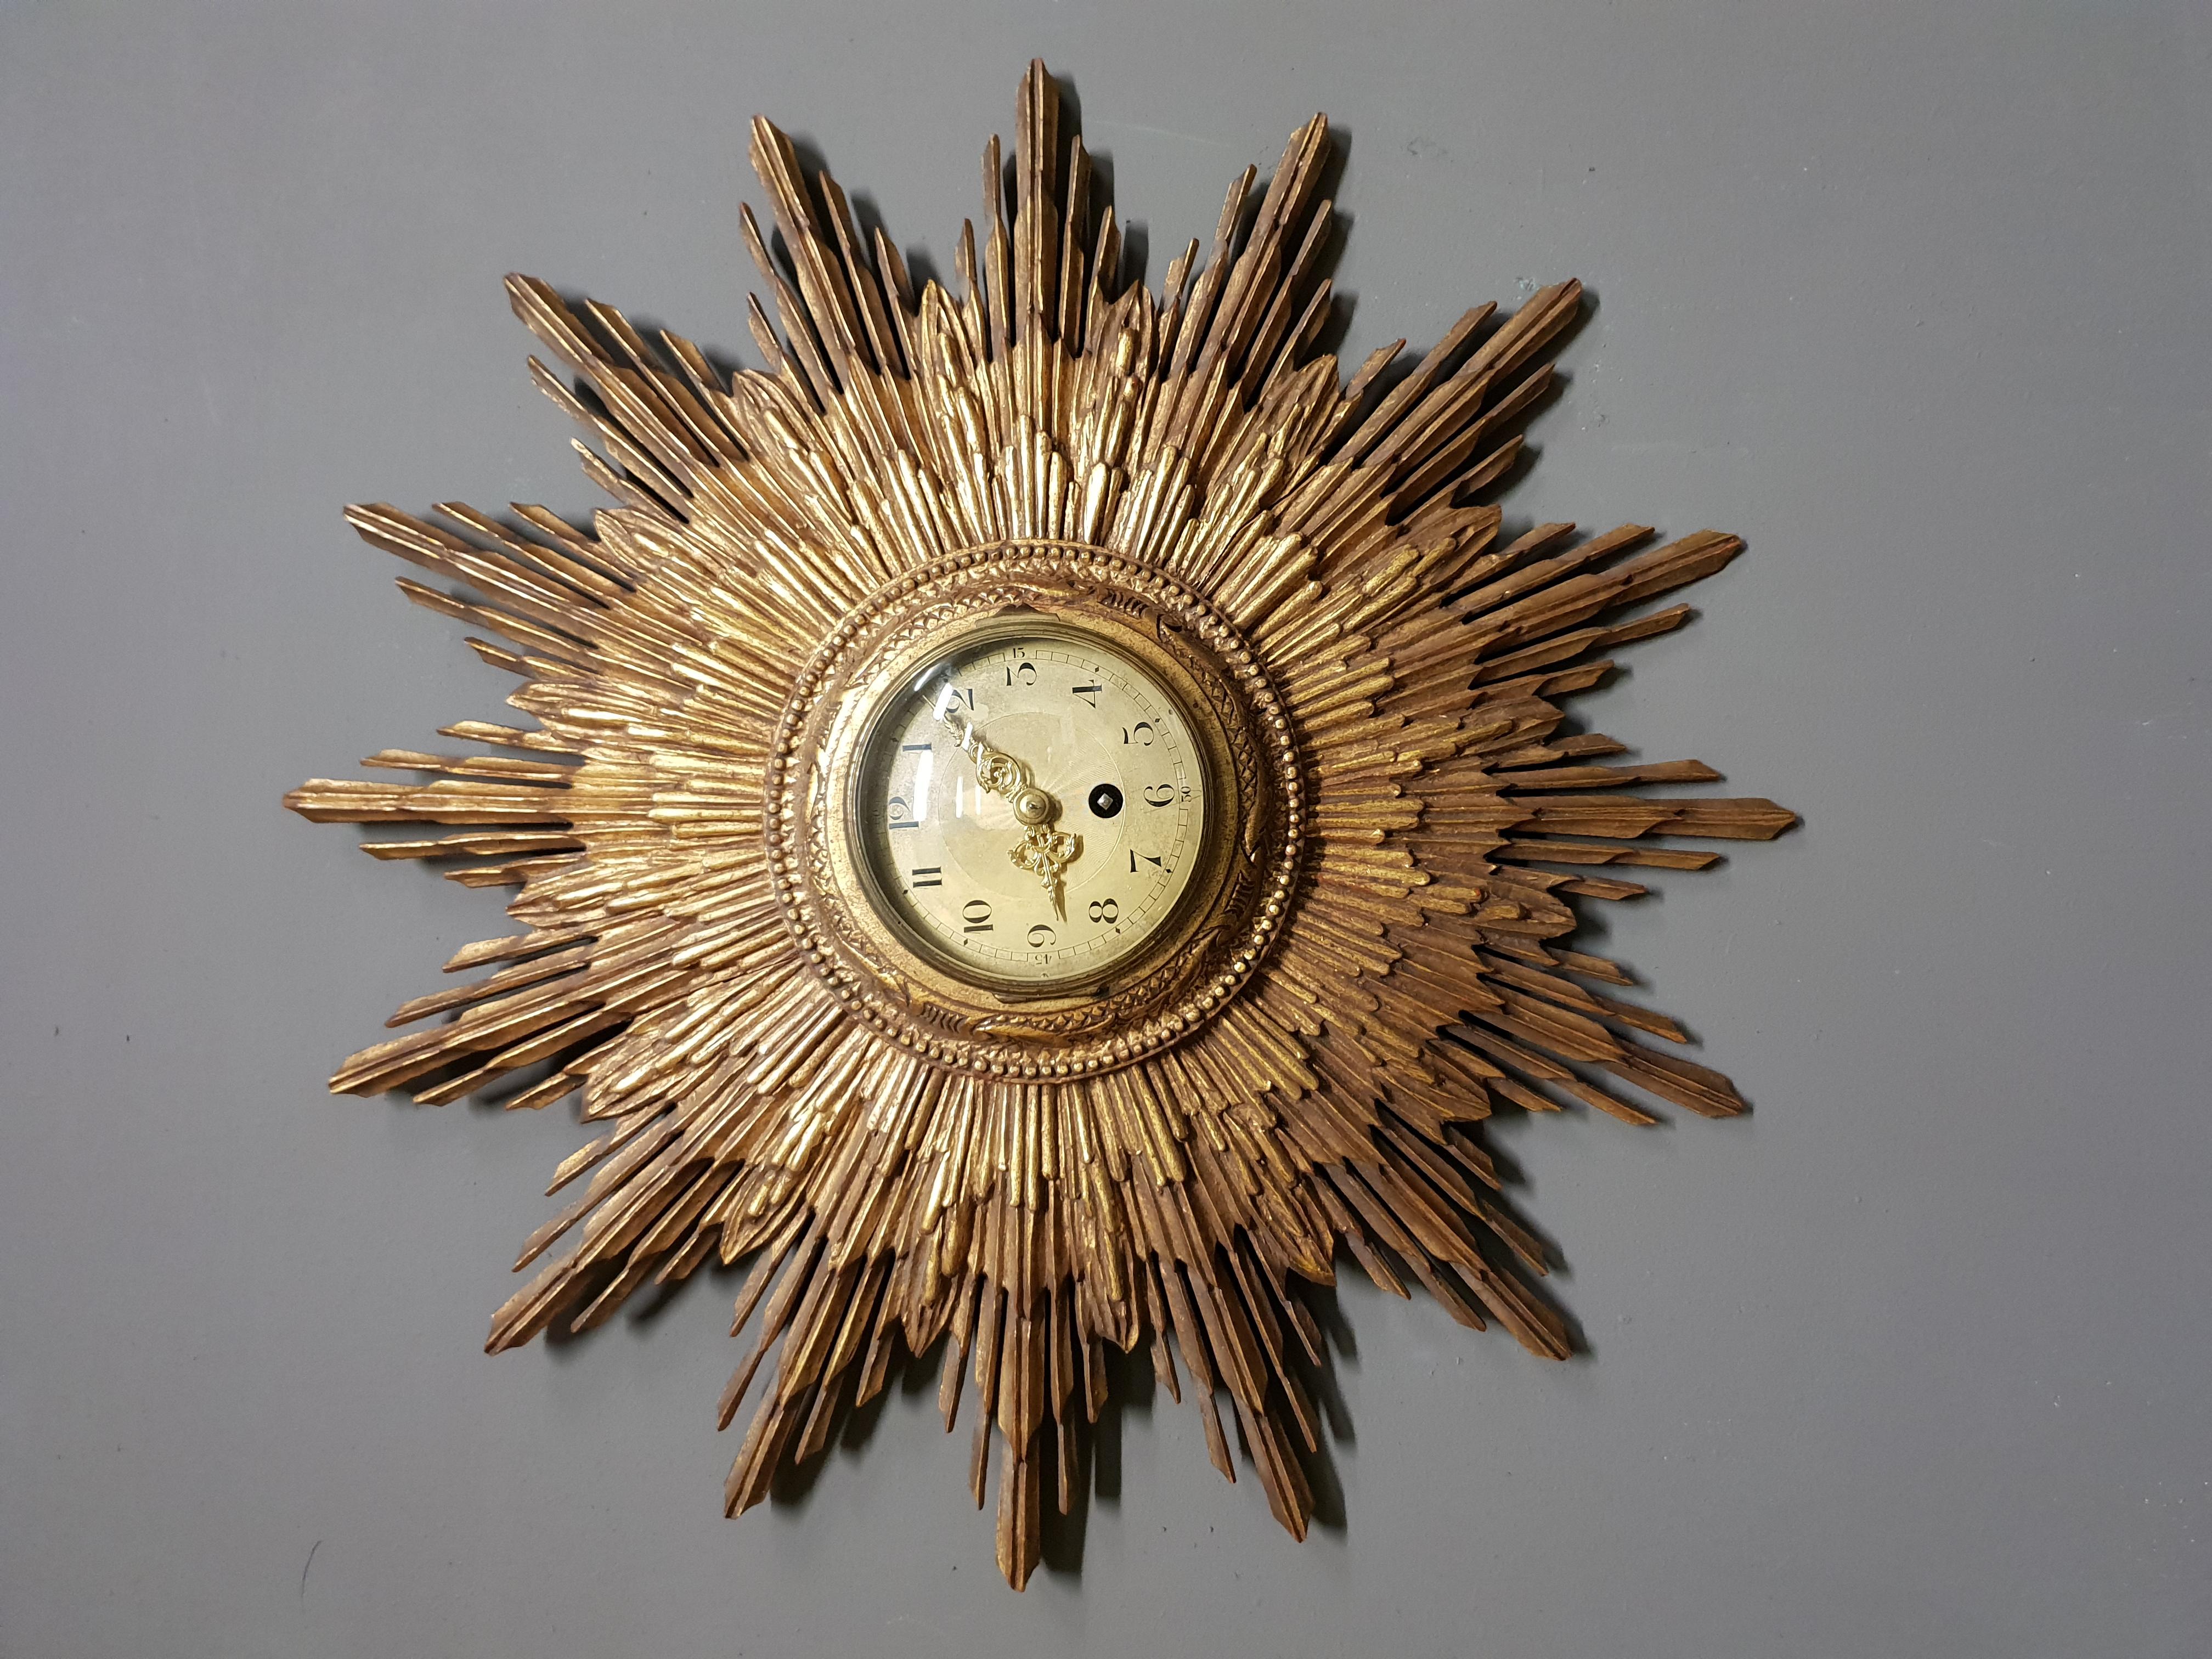 A mindblowing radiant sunburst clock by the French clockmaker Japy Frères, circa 1920.
This impressive and functional wall sculpture is made out of gilded carved wood.
A true piece of art.
The clock is engraved with the Japy Frères brand and